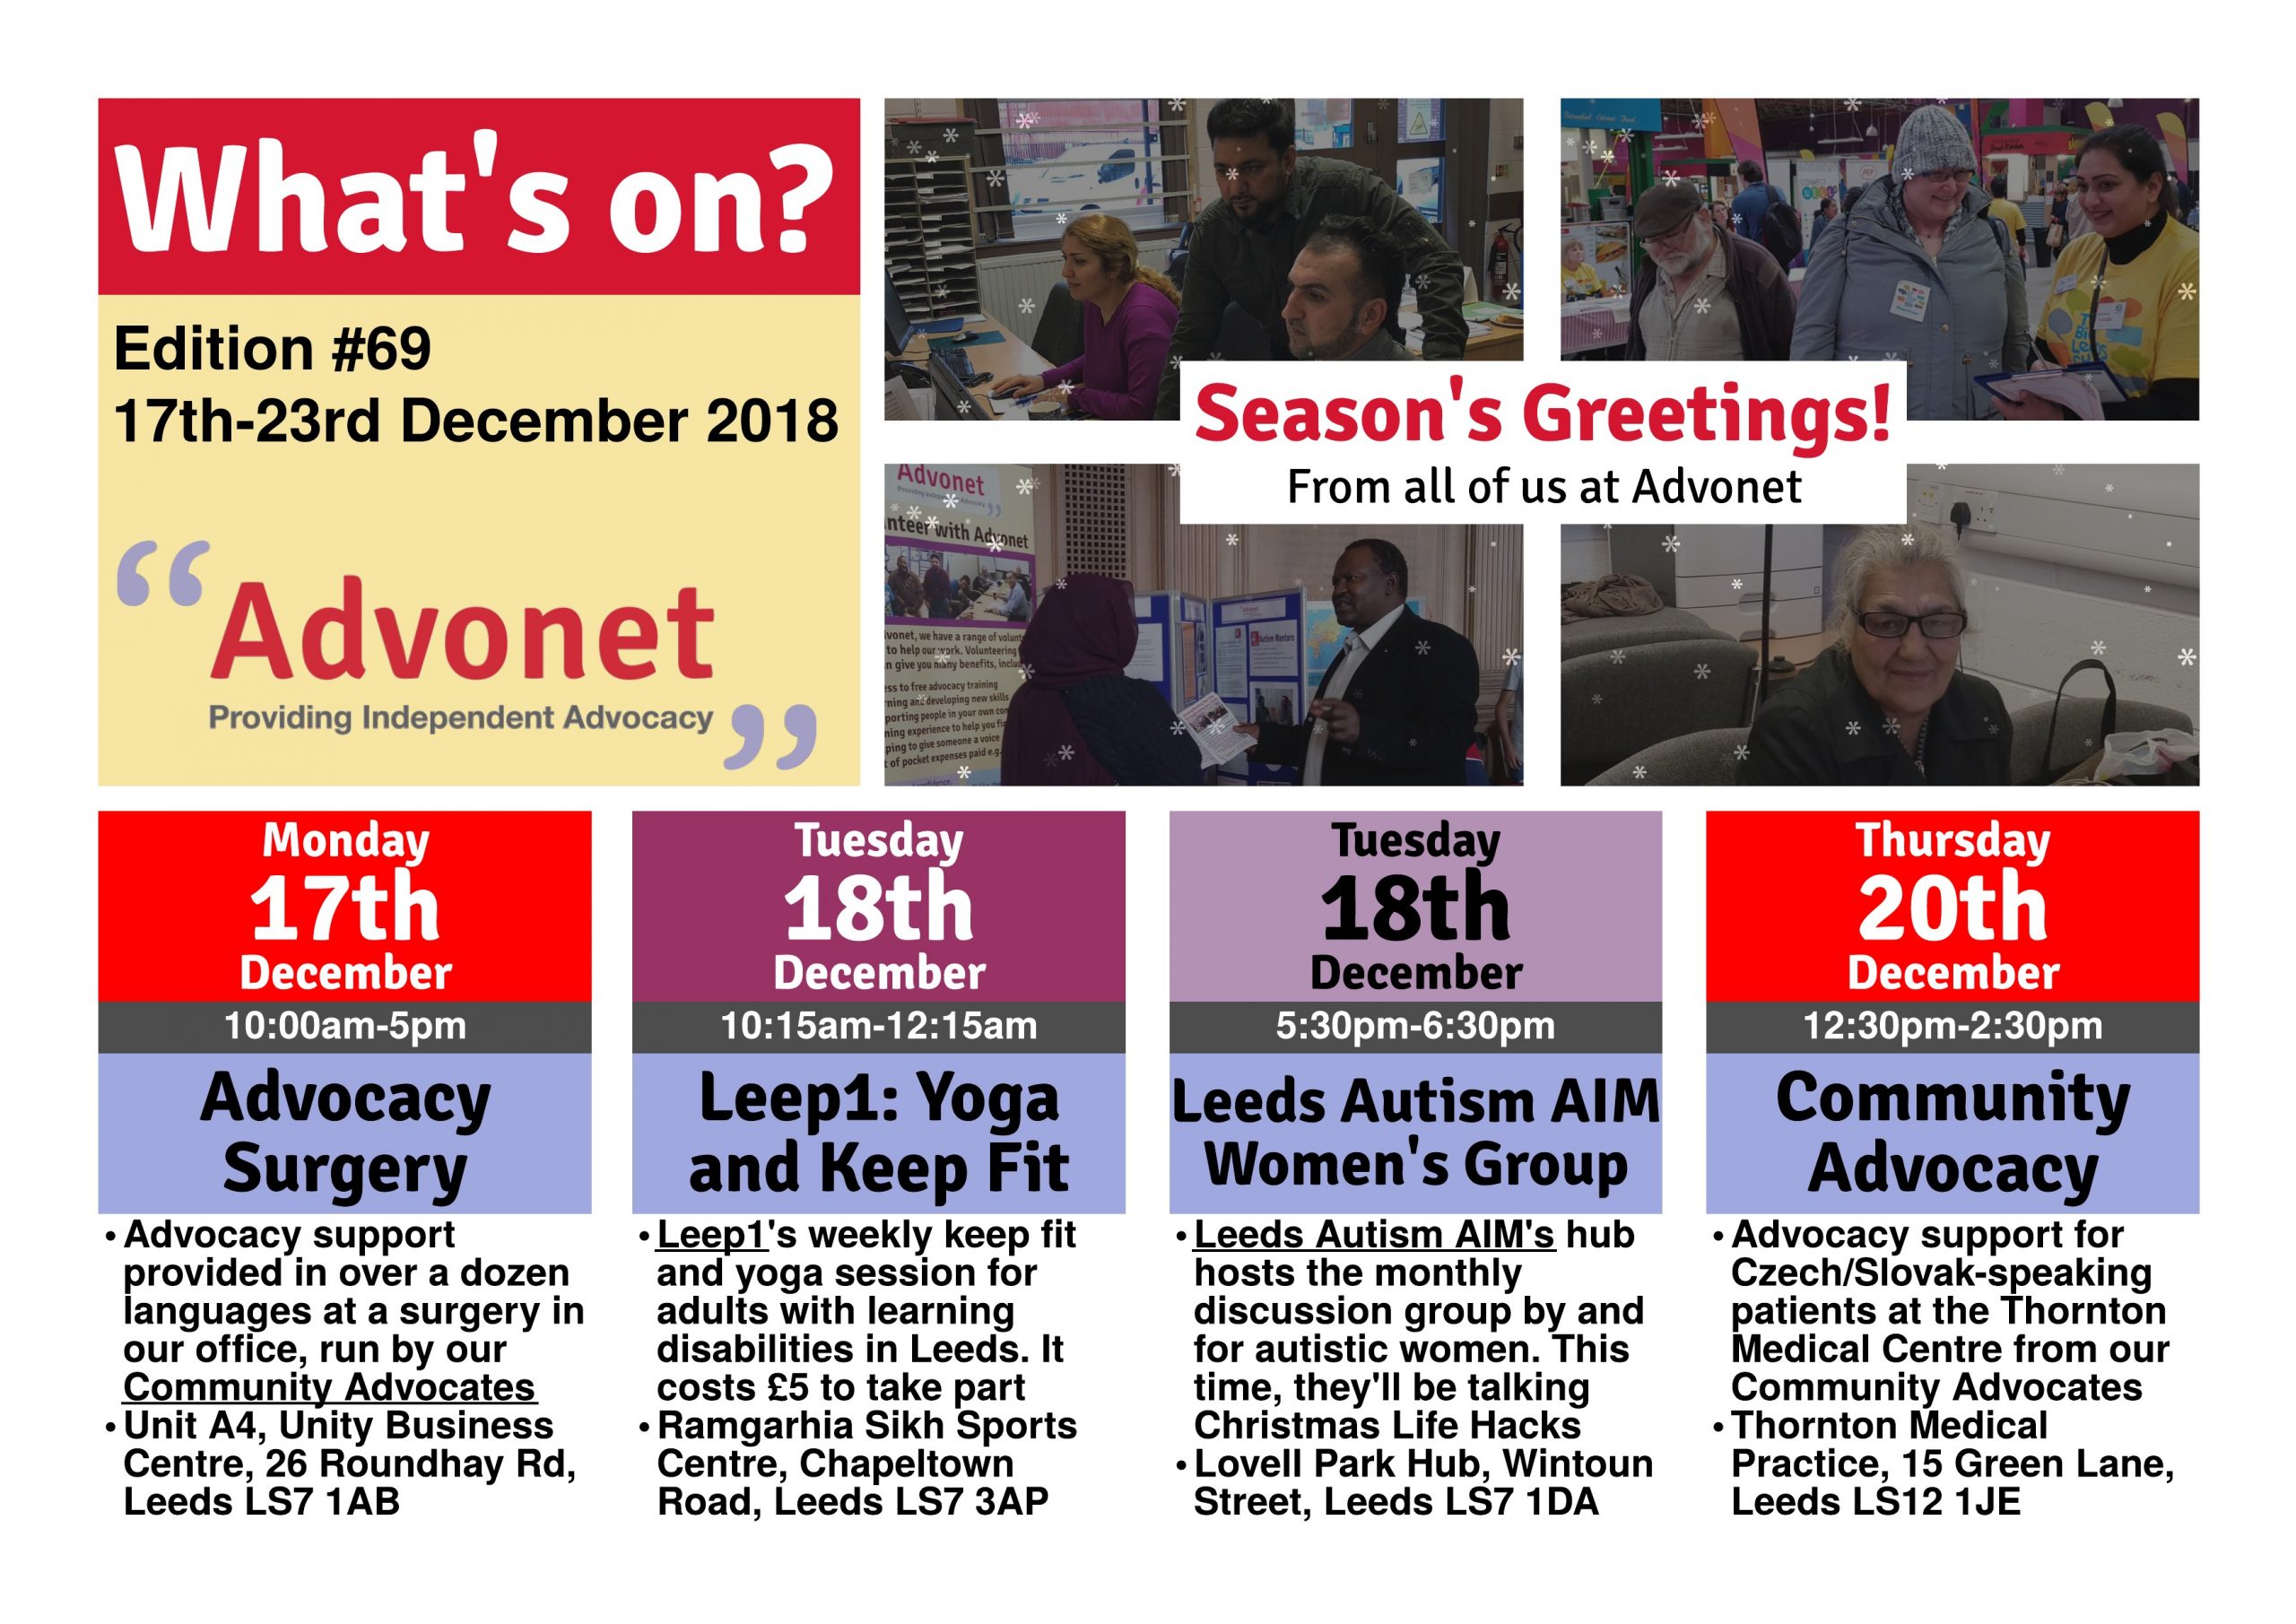 What's On - 17th-23rd December 2018